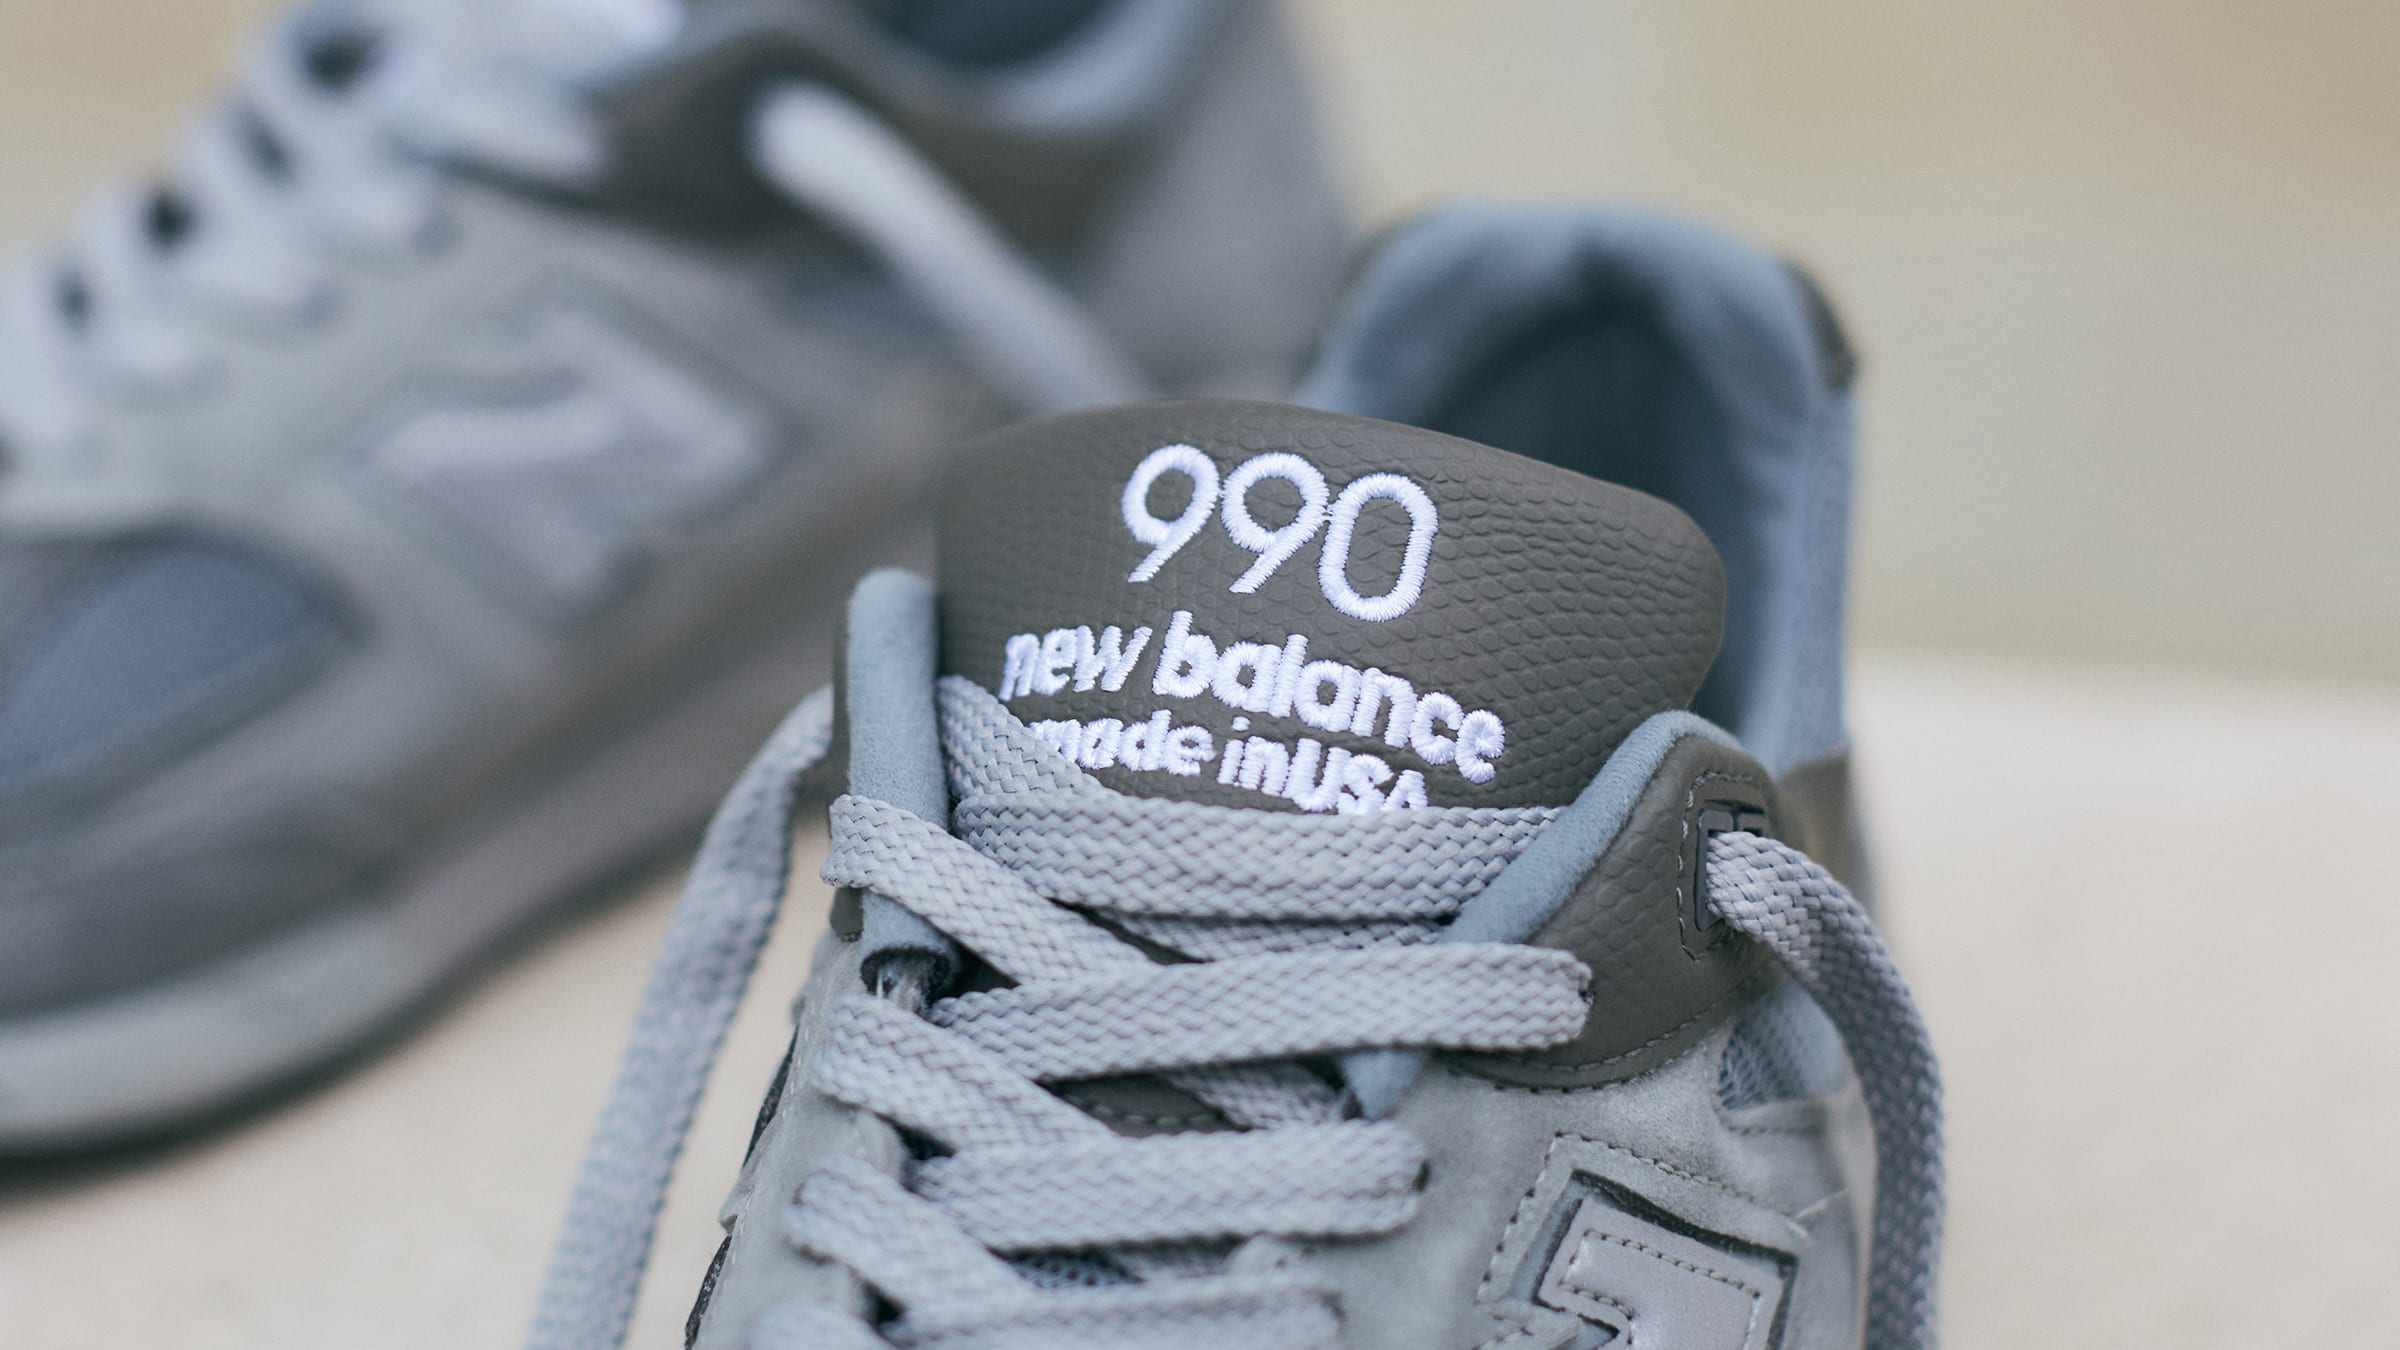 New Balance x WTAPS 990V2 - Made in the USA (Concrete) | END. Launches